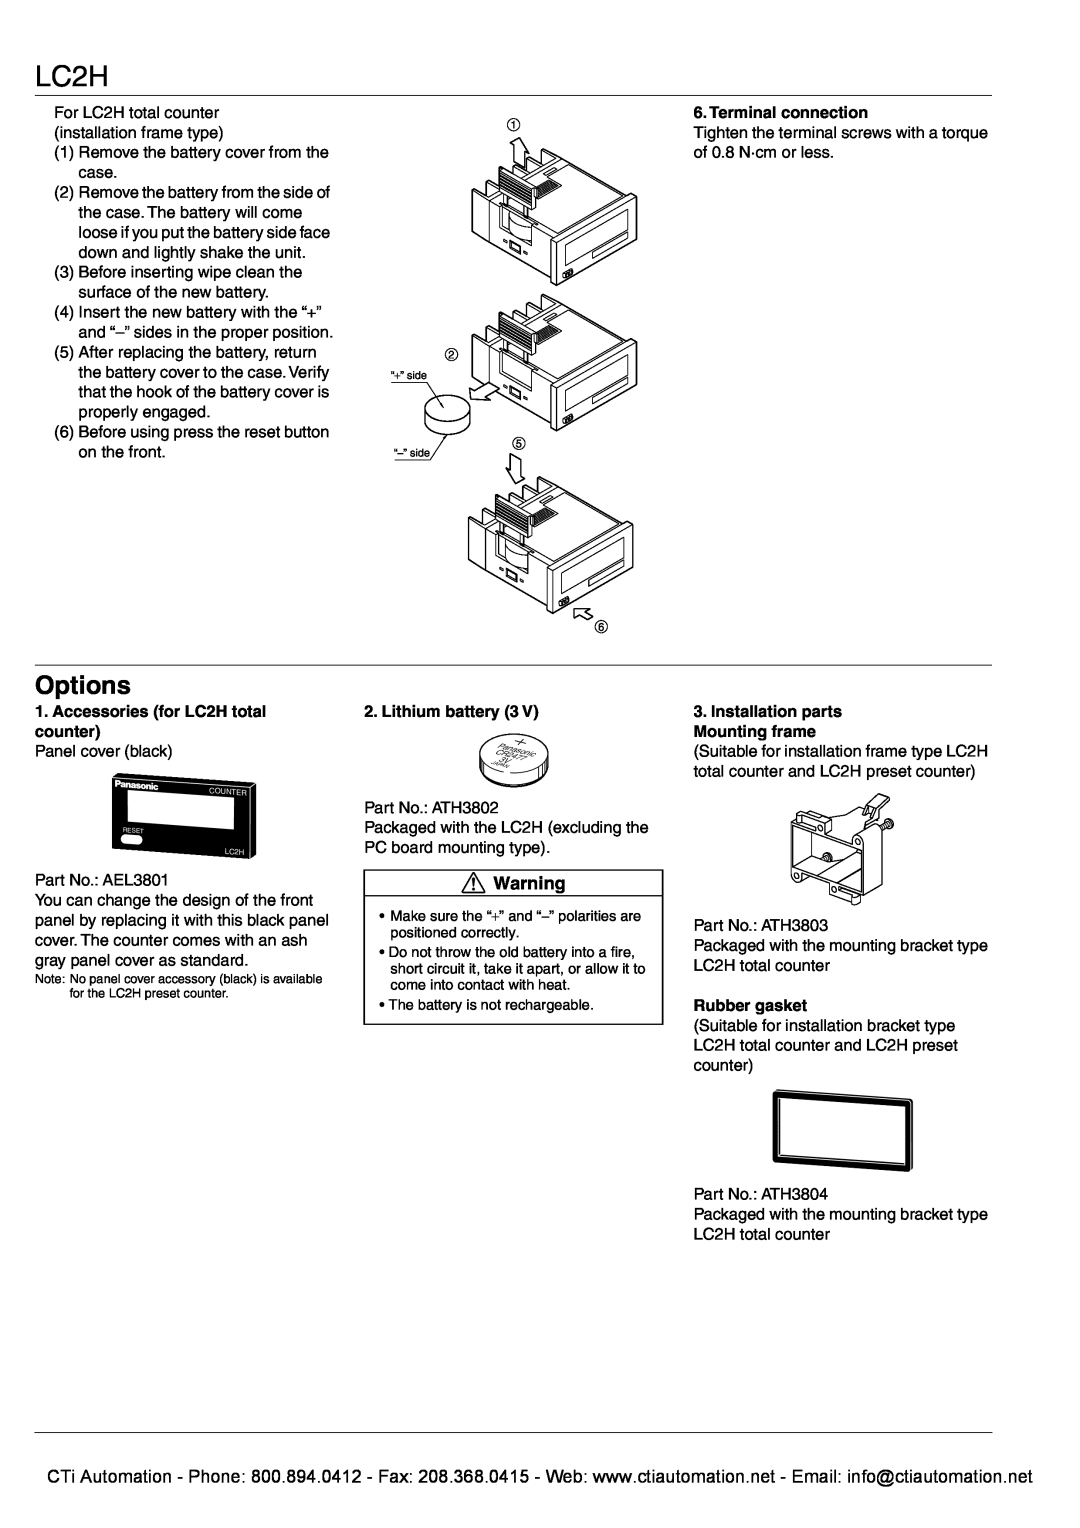 Panasonic Options, Terminal connection, Accessories for LC2H total counter, Lithium battery 3, Rubber gasket 